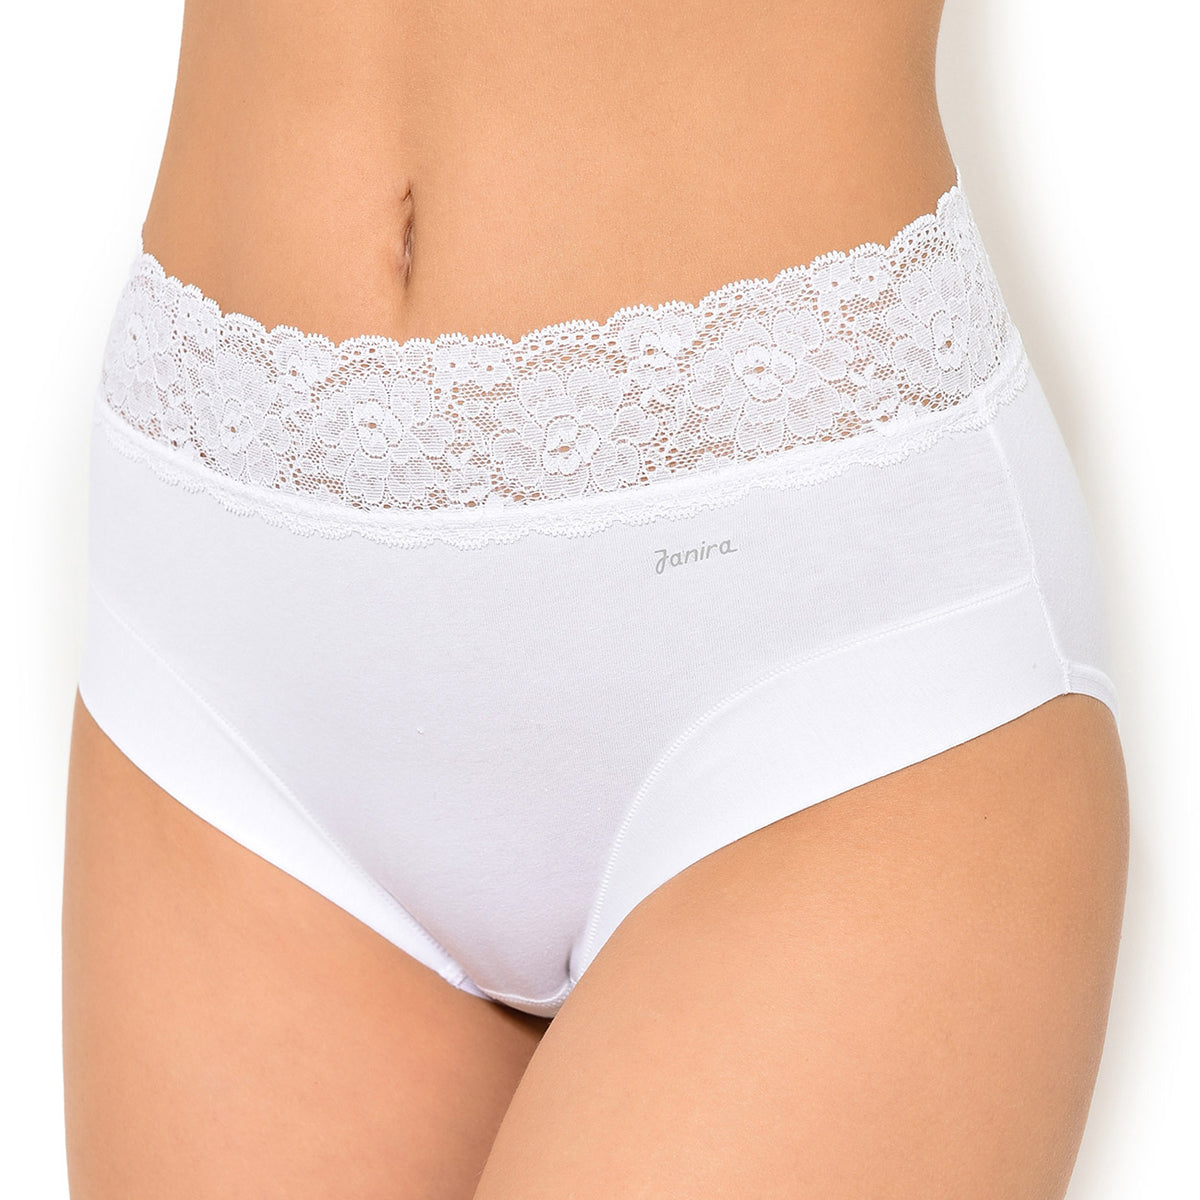 NEXT microfibre-and-lace-knickers-nxt-198526-lightpink White Women Briefs